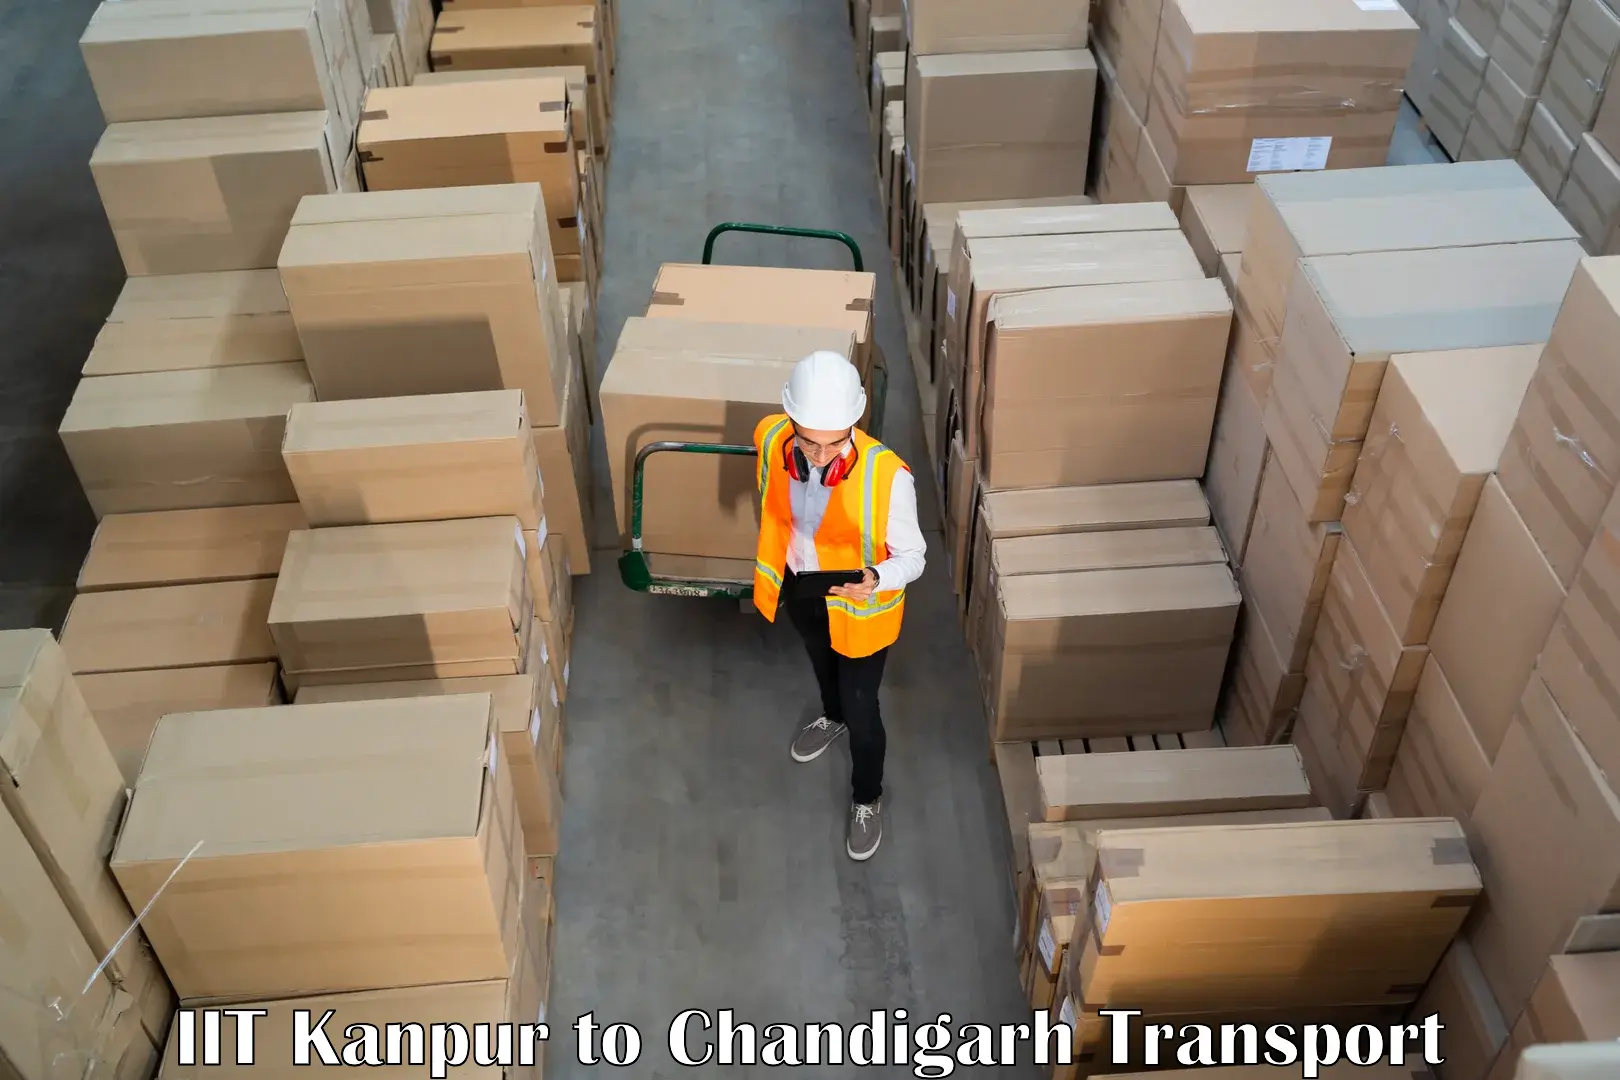 Air freight transport services IIT Kanpur to Panjab University Chandigarh